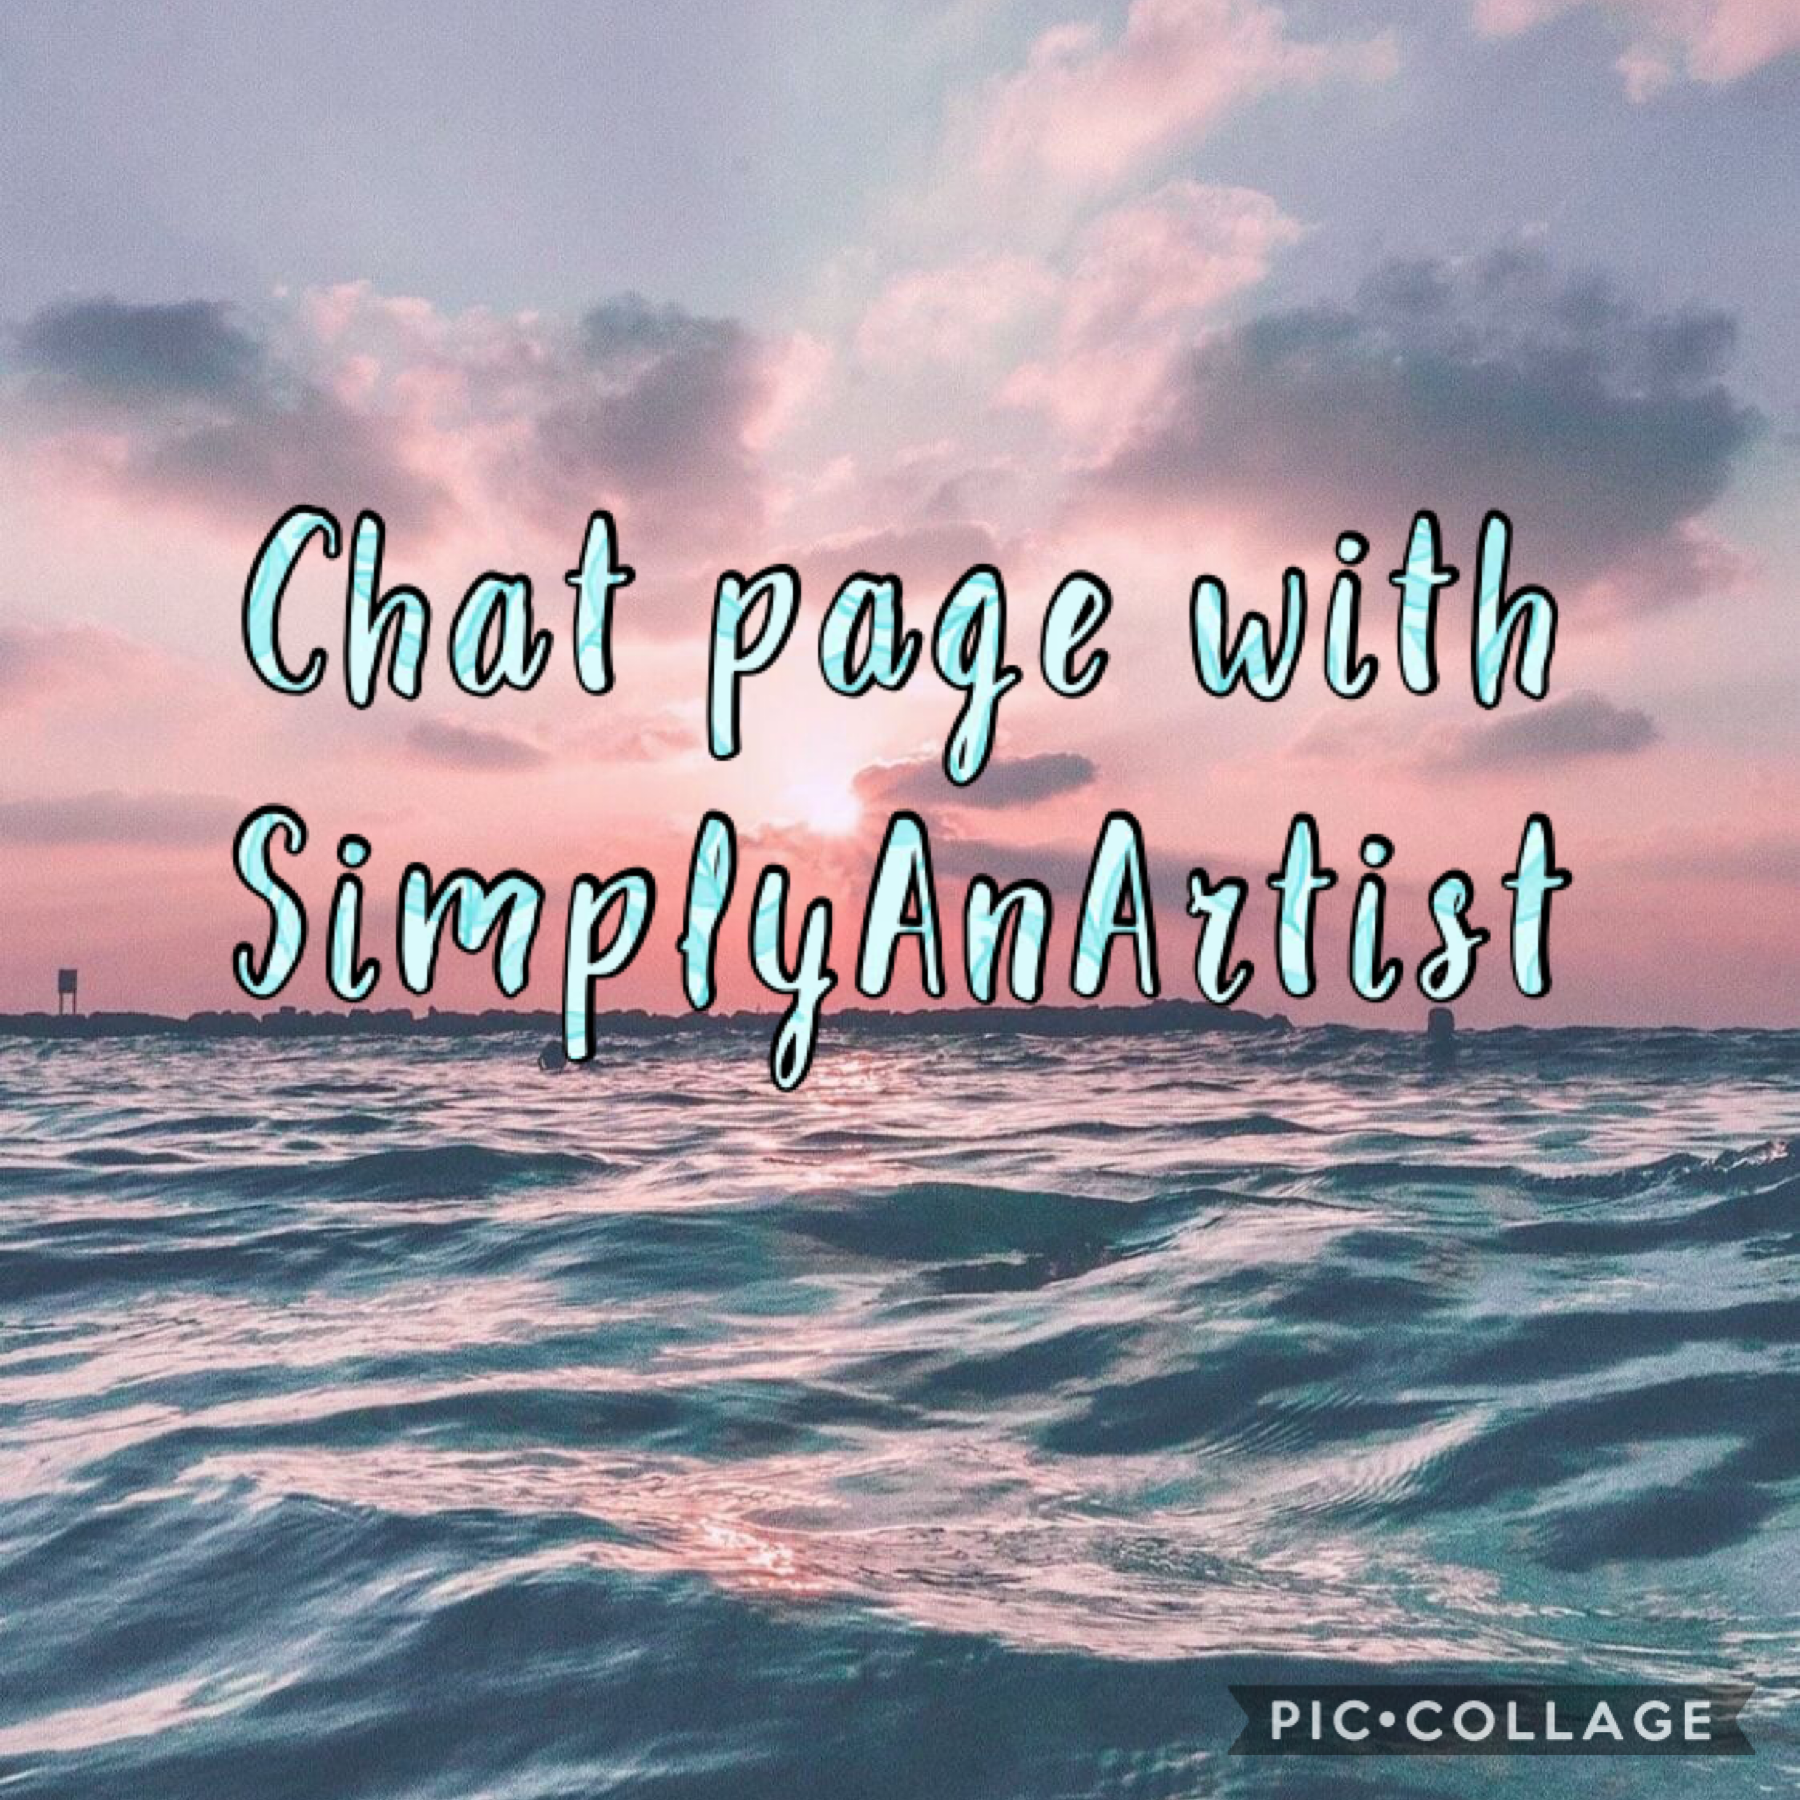 Chat page with SimplyAnArtist